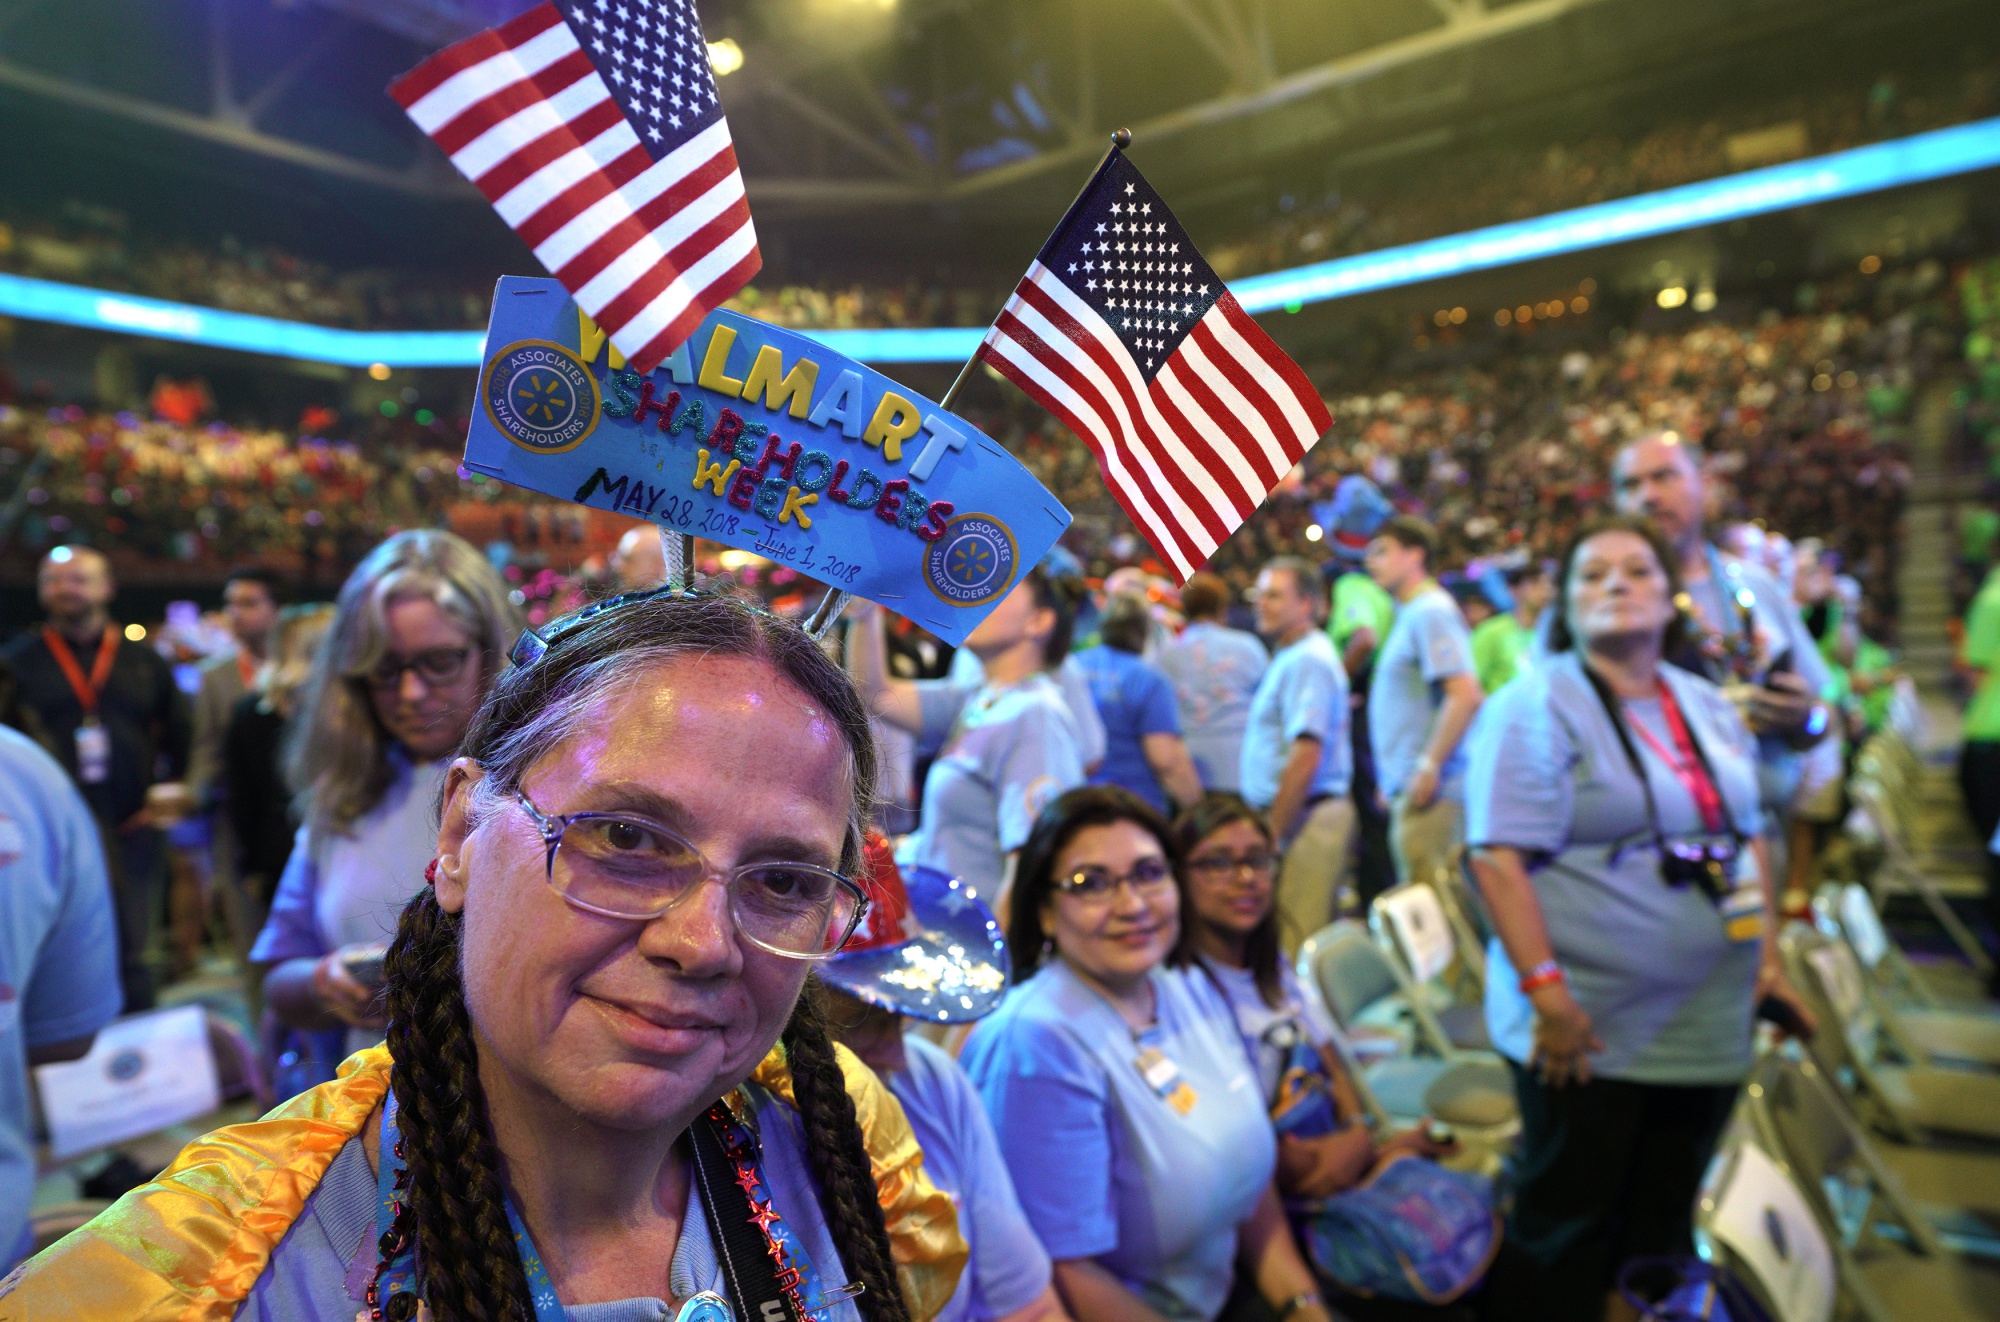 Walmart employees during an annual shareholders meeting event on June 1, 2018 in Fayetteville, Arkansas.